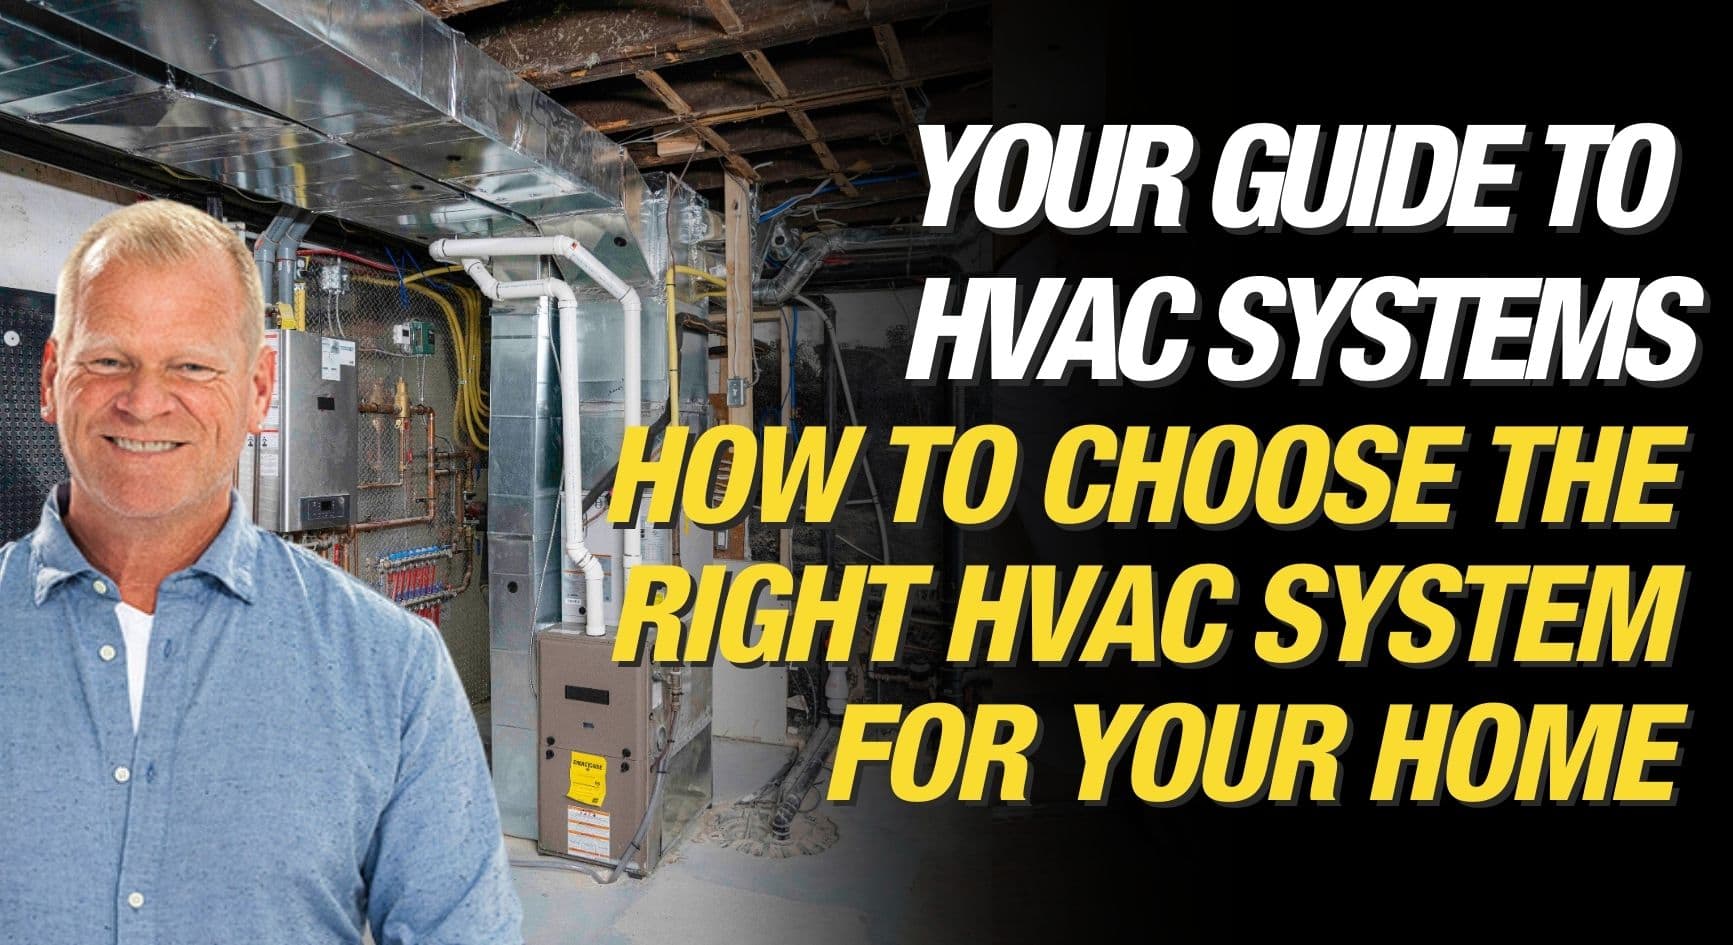 Palmdale HVAC Essentials: Home Size, Budget, and Climate Factors to Consider - Impact of home size on HVAC system selection